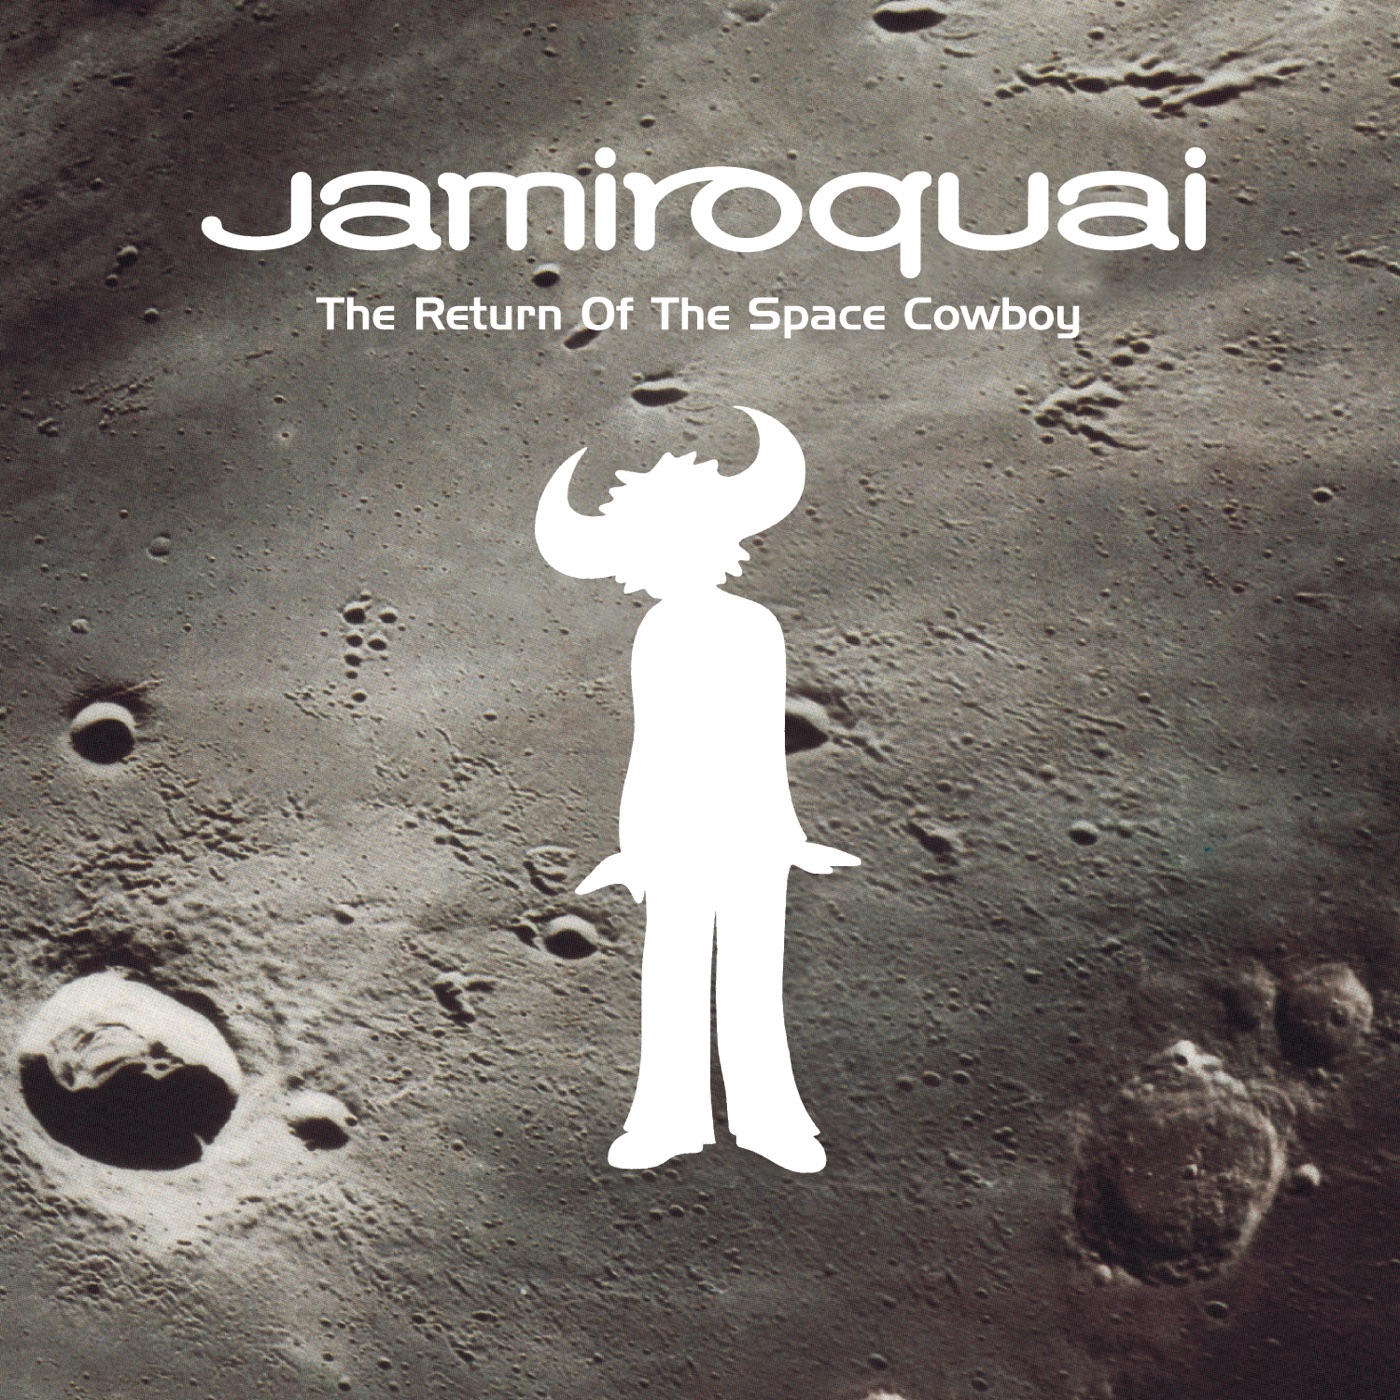 The Return of the Space Cowboy (Remastered) by Jamiroquai